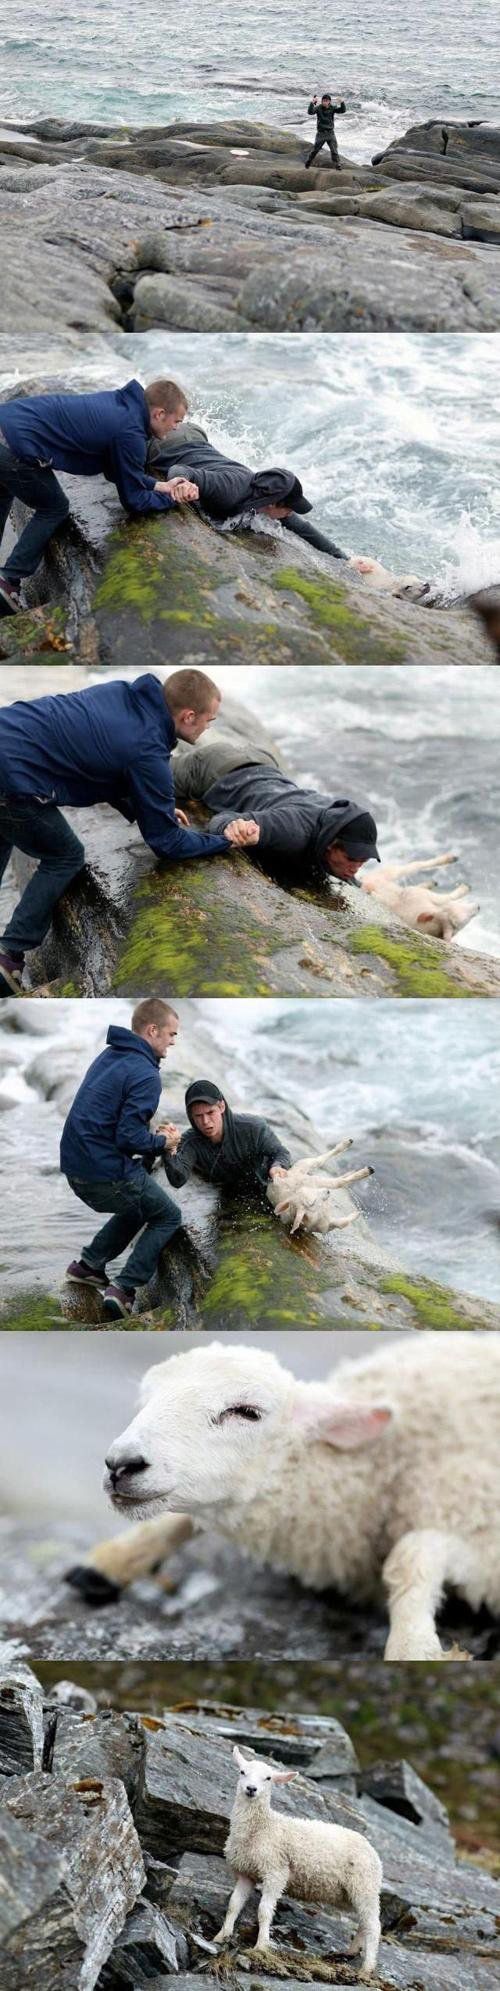 Inspiring Photos That Will Restore Your Faith in Humanity